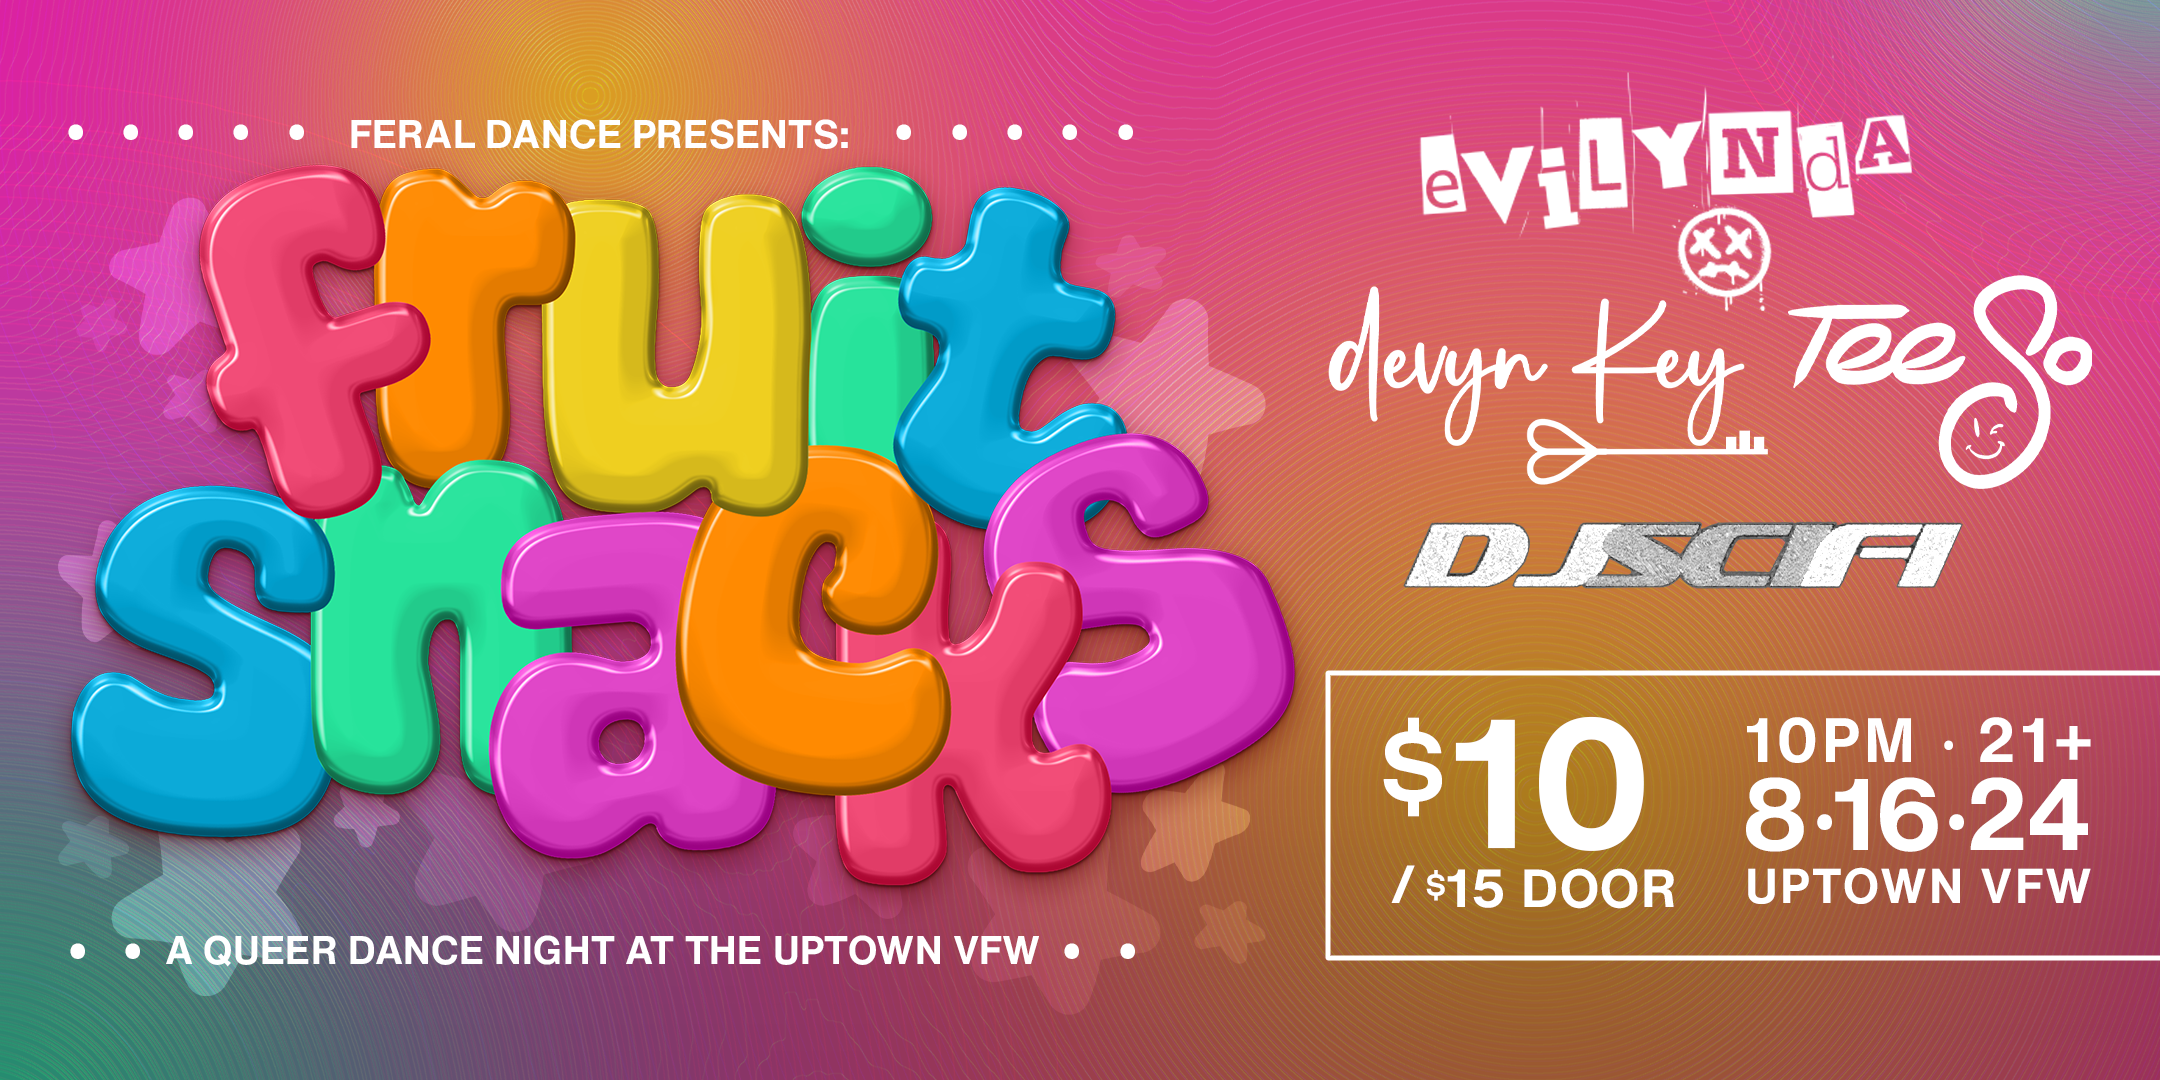 Fruit Snacks: An Inclusive EDM Dance Night presented by Feral Dance! Evilynda | Devyn Key | Tee So | DJ Sci-Fi Friday August 16 James Ballentine "Uptown" VFW Post 246 2916 Lyndale Ave S Mpls Doors 10pm : : Music 10pm : : 21+ GA: $10 ADV / $15 DOS Tickets on Sale Now